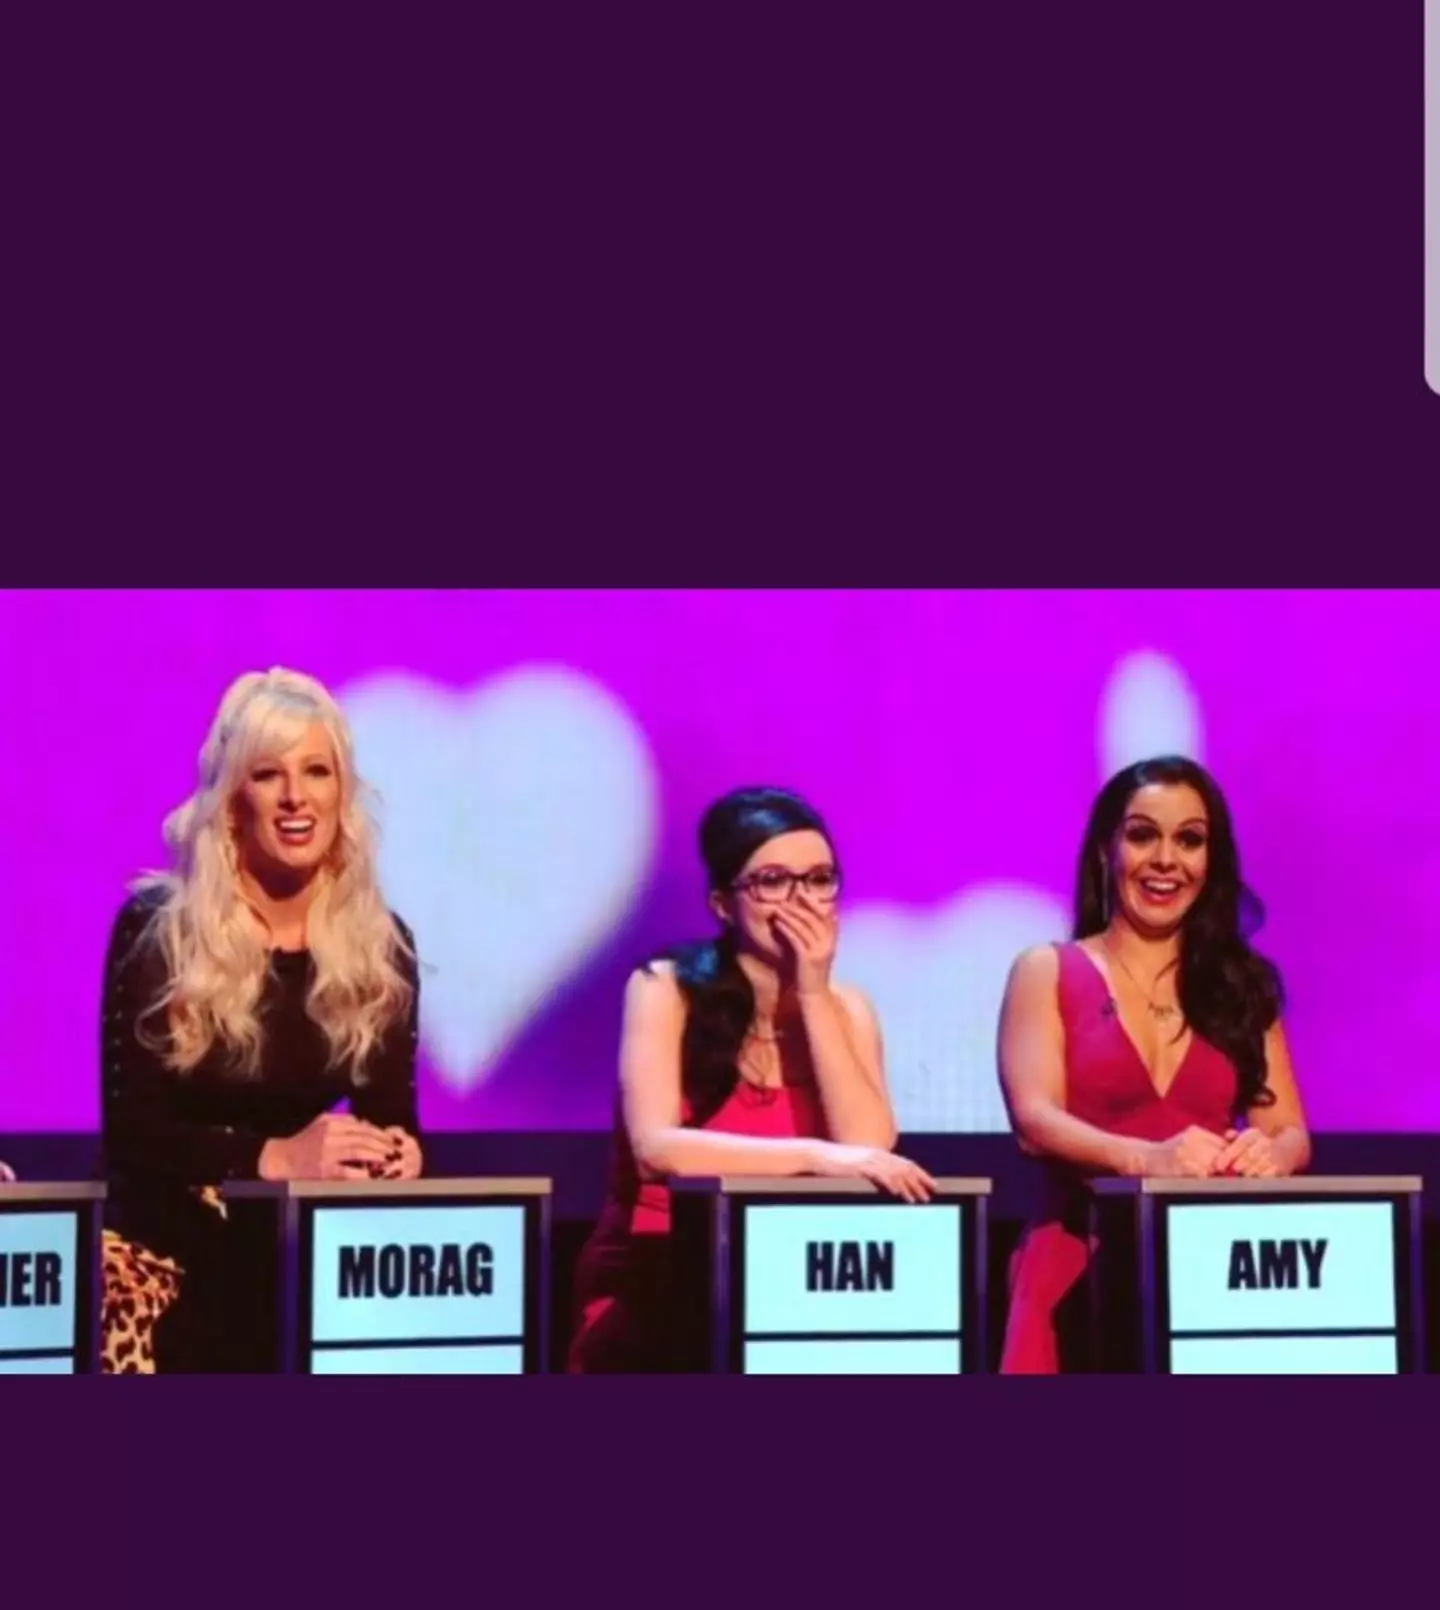 Morag has also appeared on Take Me Out as well as MAFS UK (